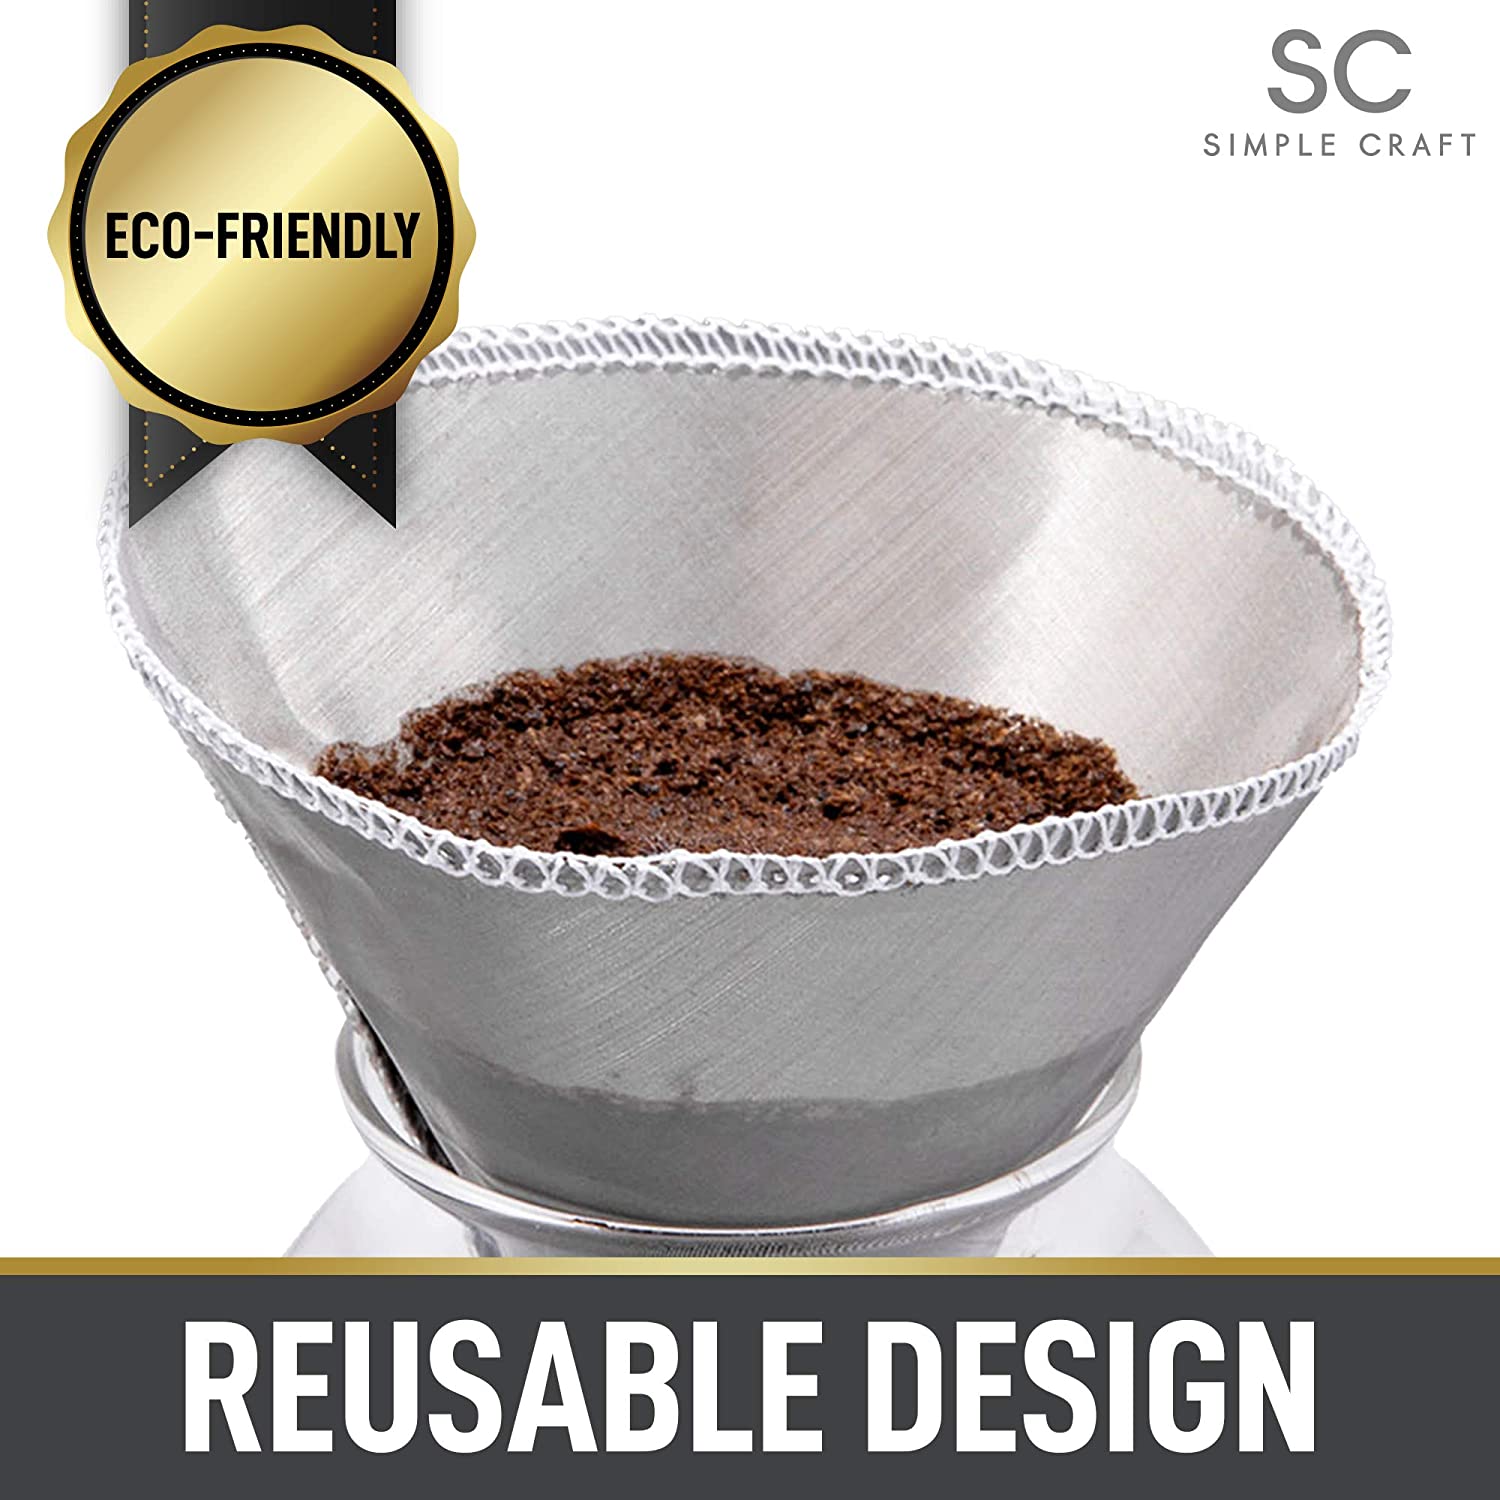 Pour Over Coffee Maker - Glass Carafe & Stainless-Steel Mesh Filter –